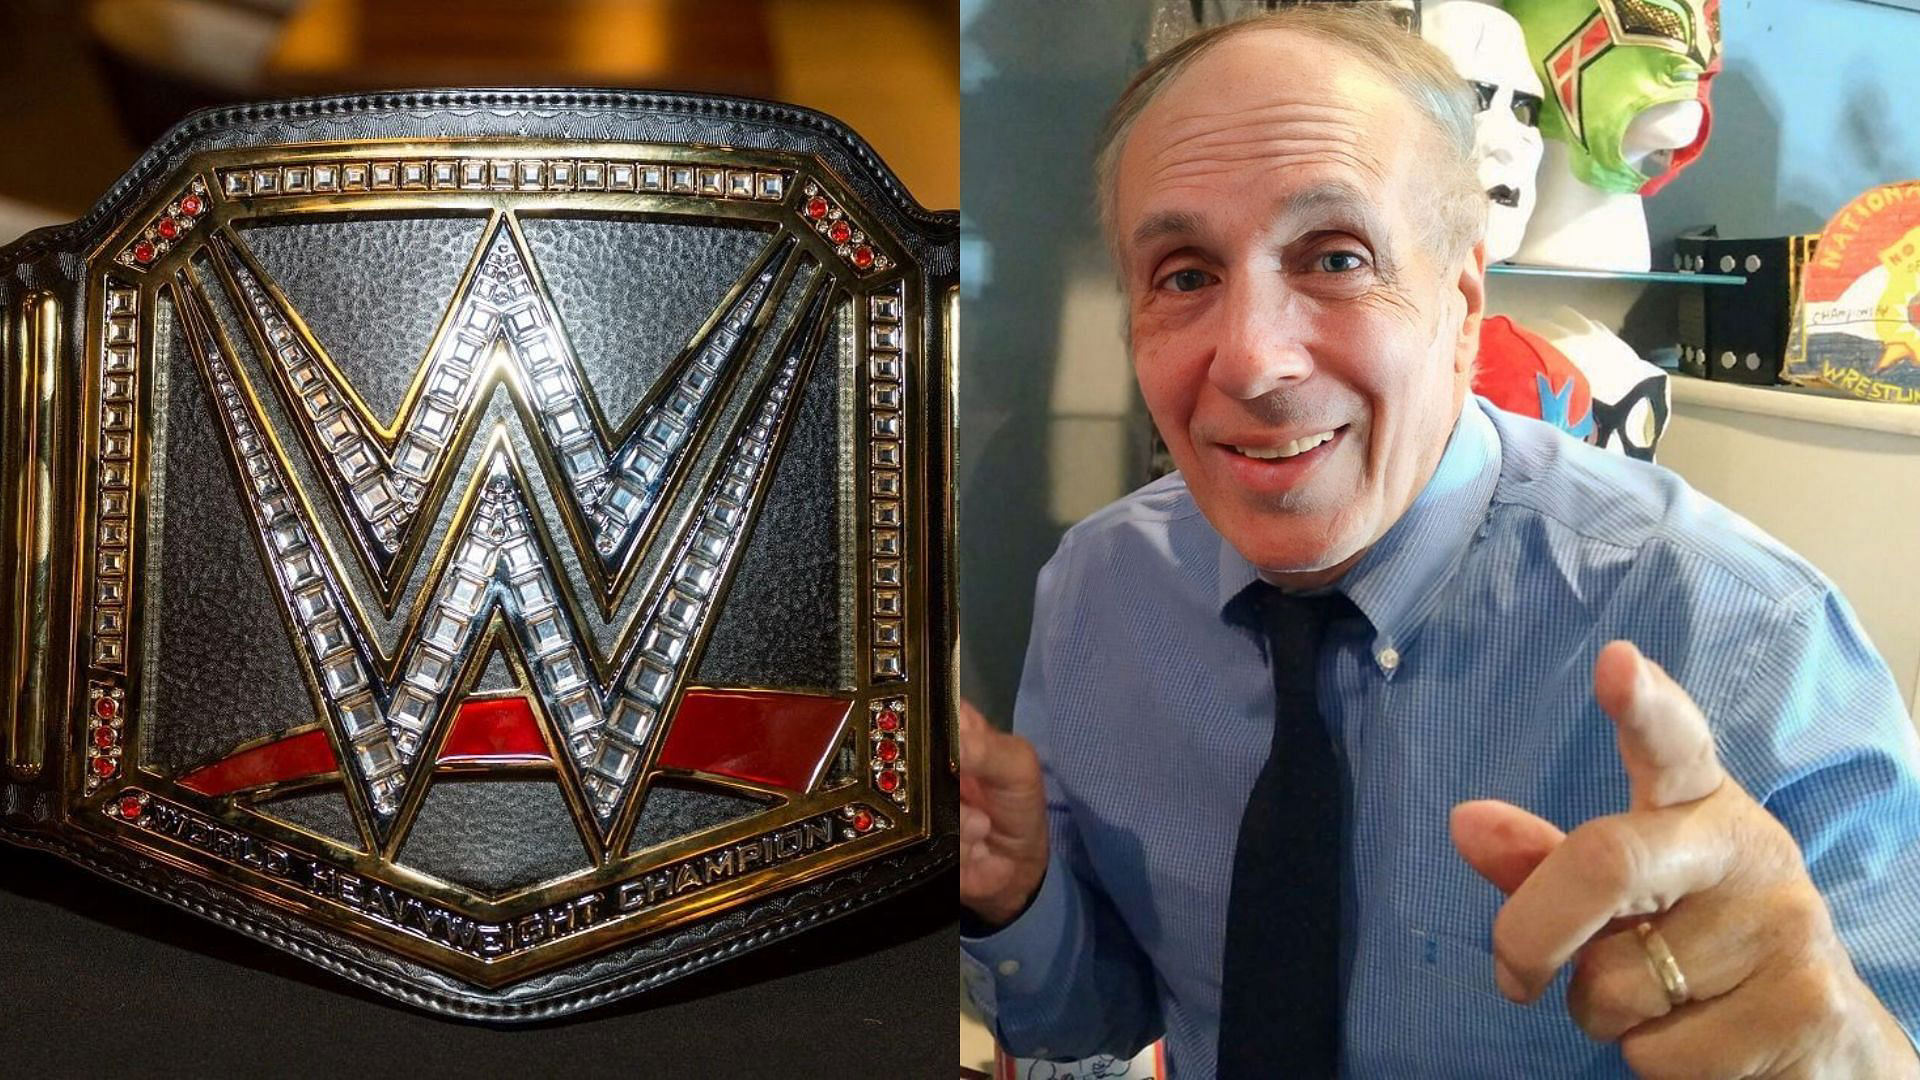 Bill Apter believes legendary 20time WWE champion is the most "hated